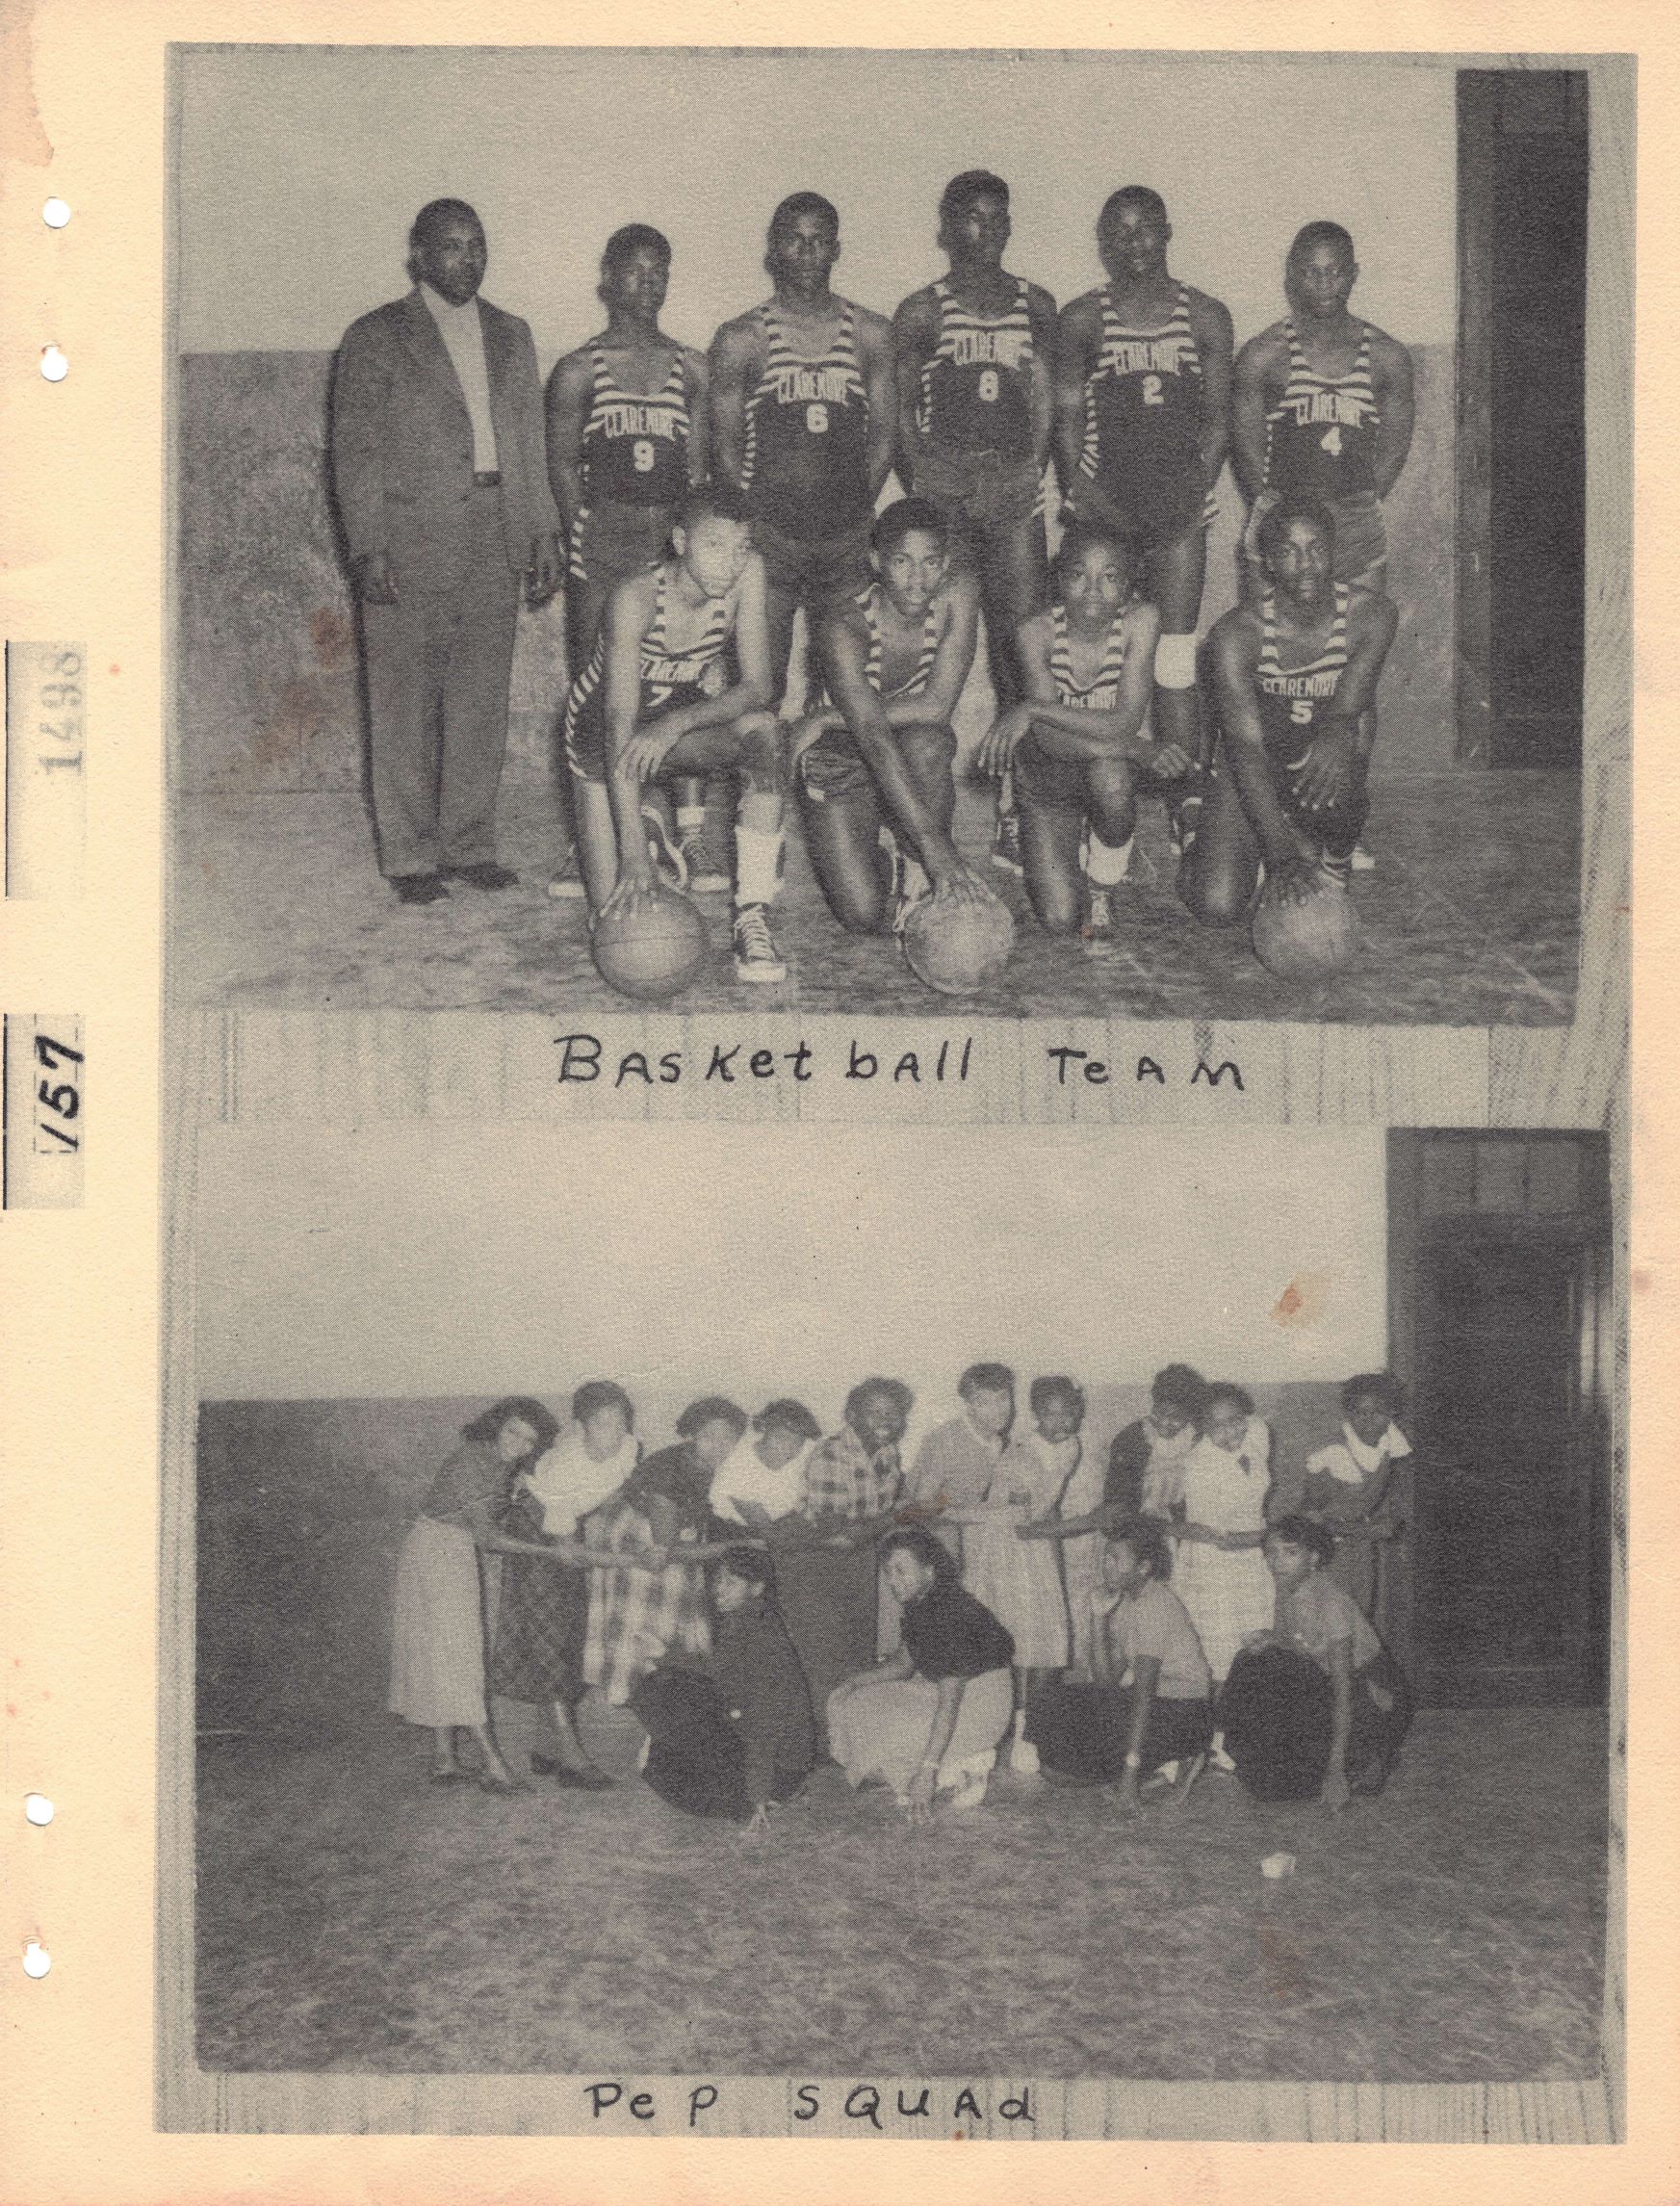 Group photograph of young men in basketball uniforms with basketballs above image of group of women with captions